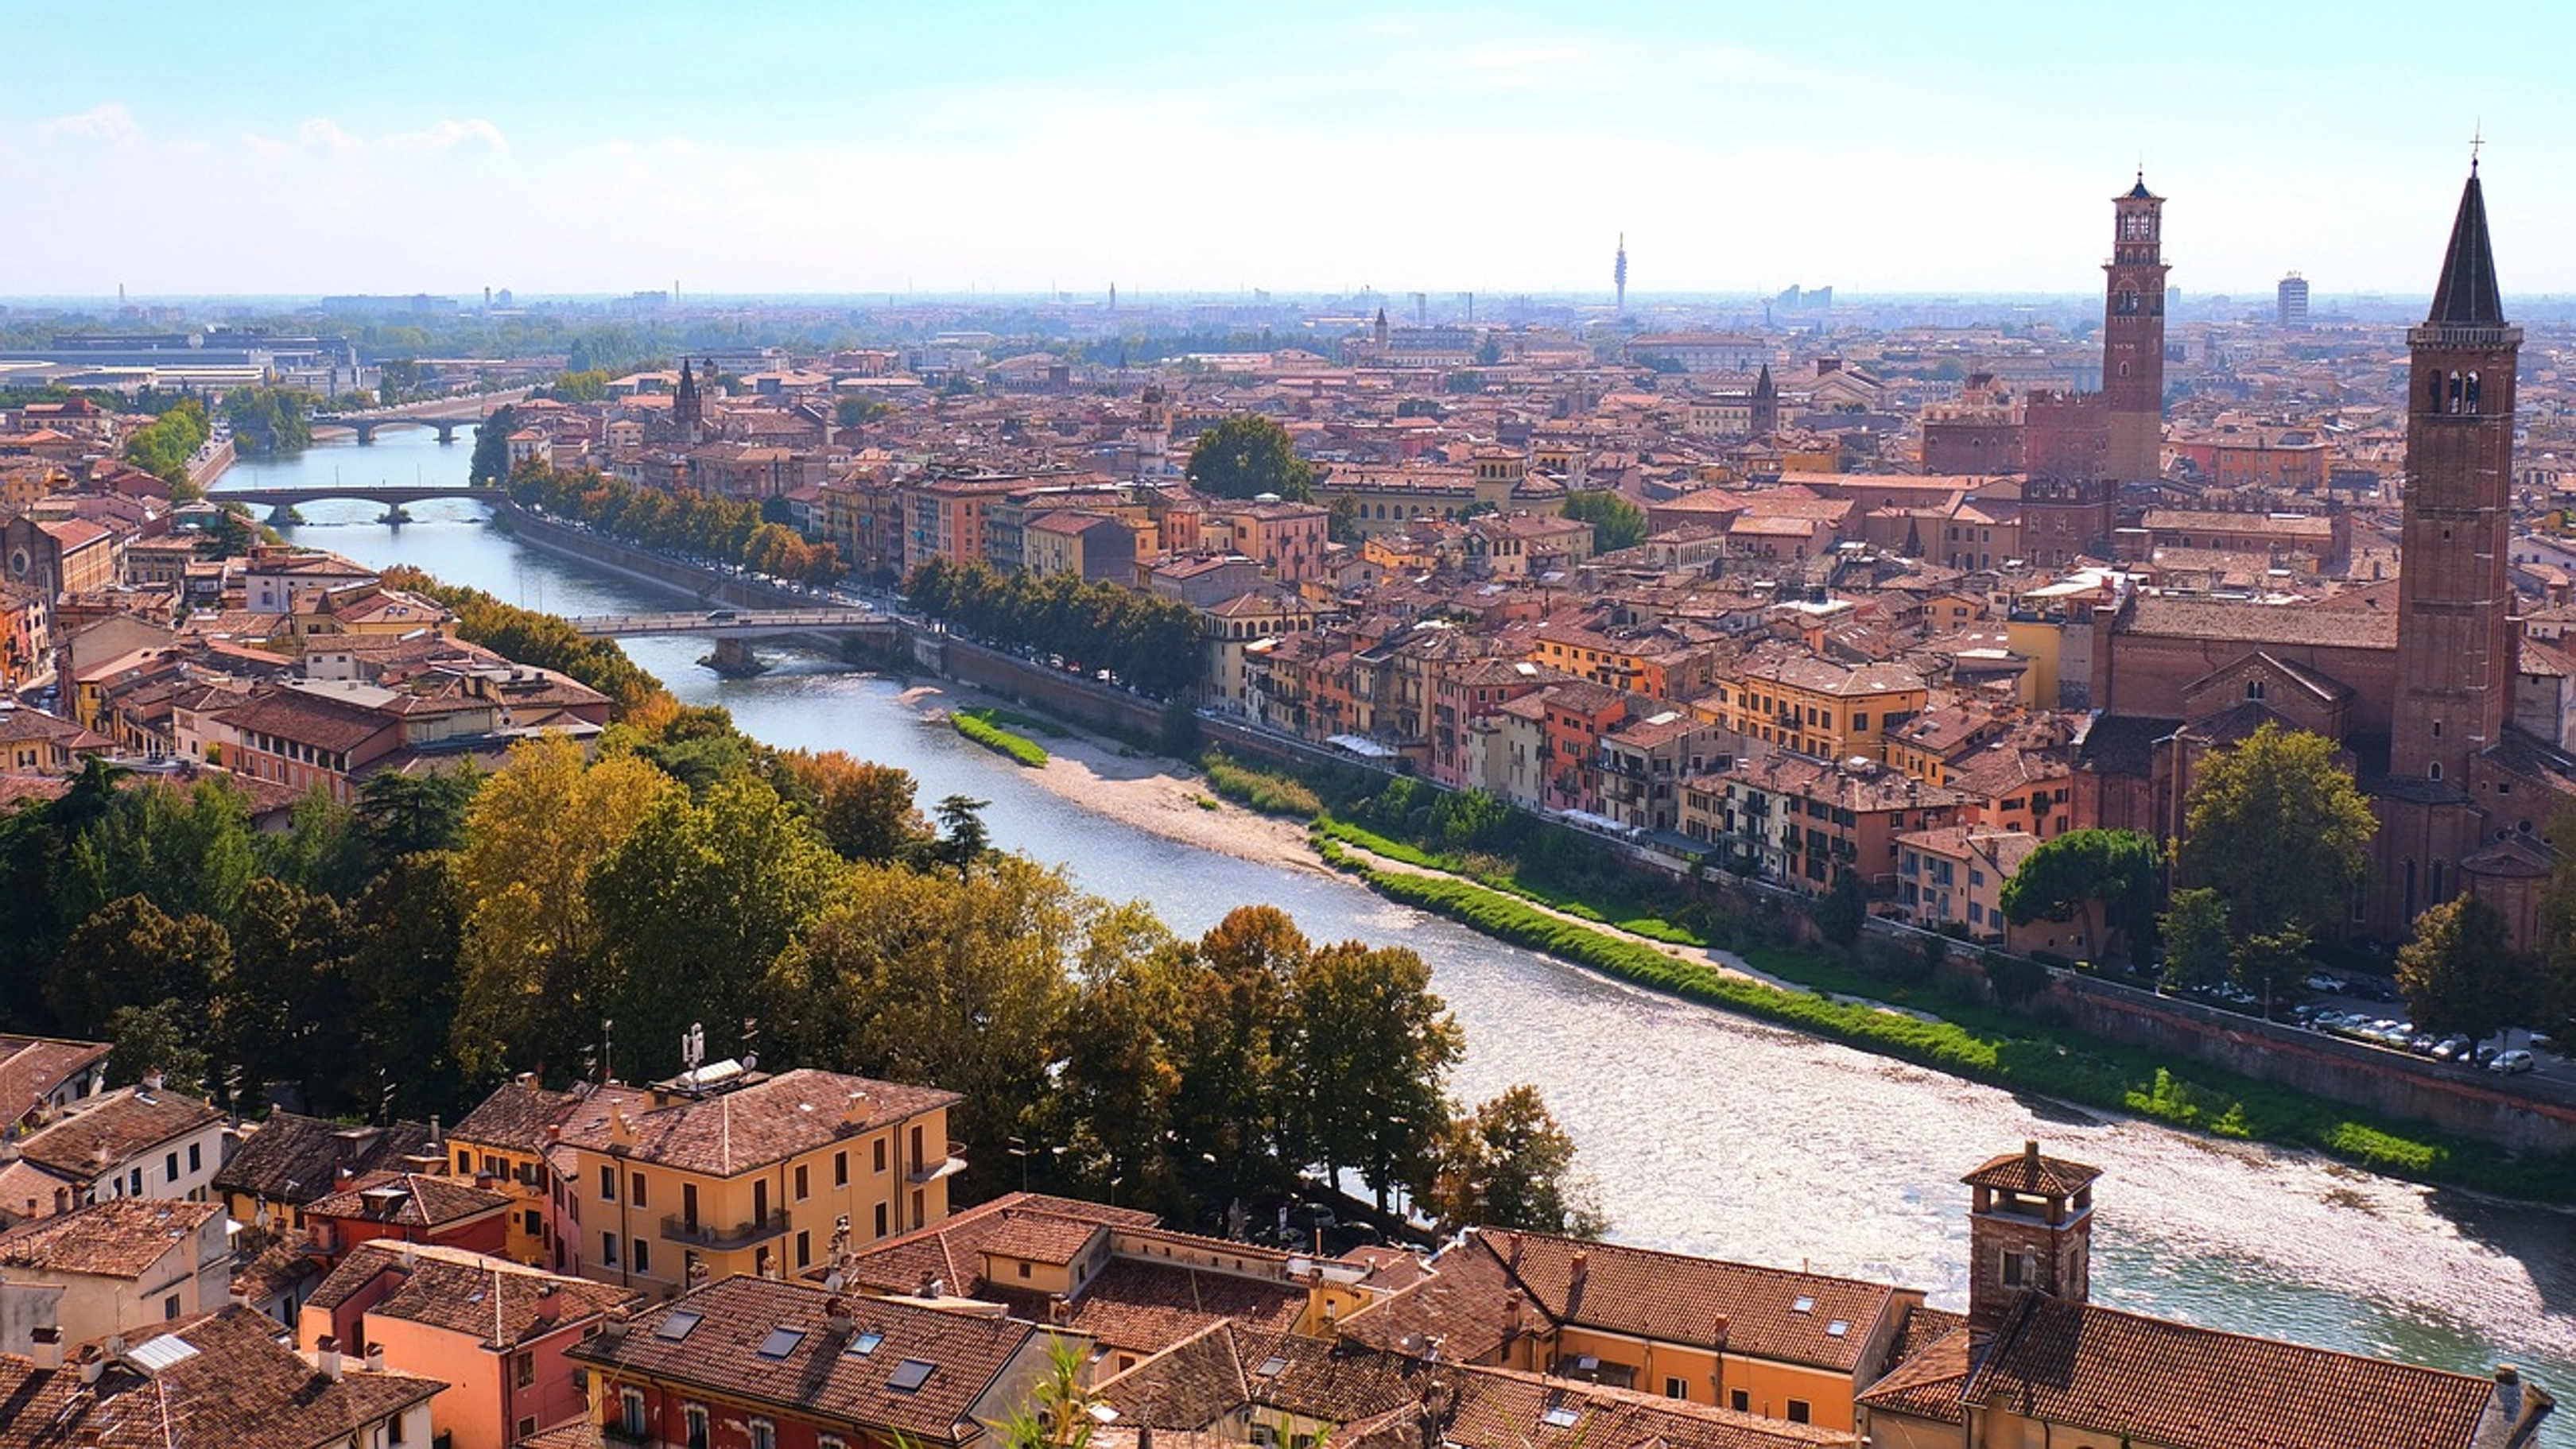 Capture your memories with a photoshoot in Verona